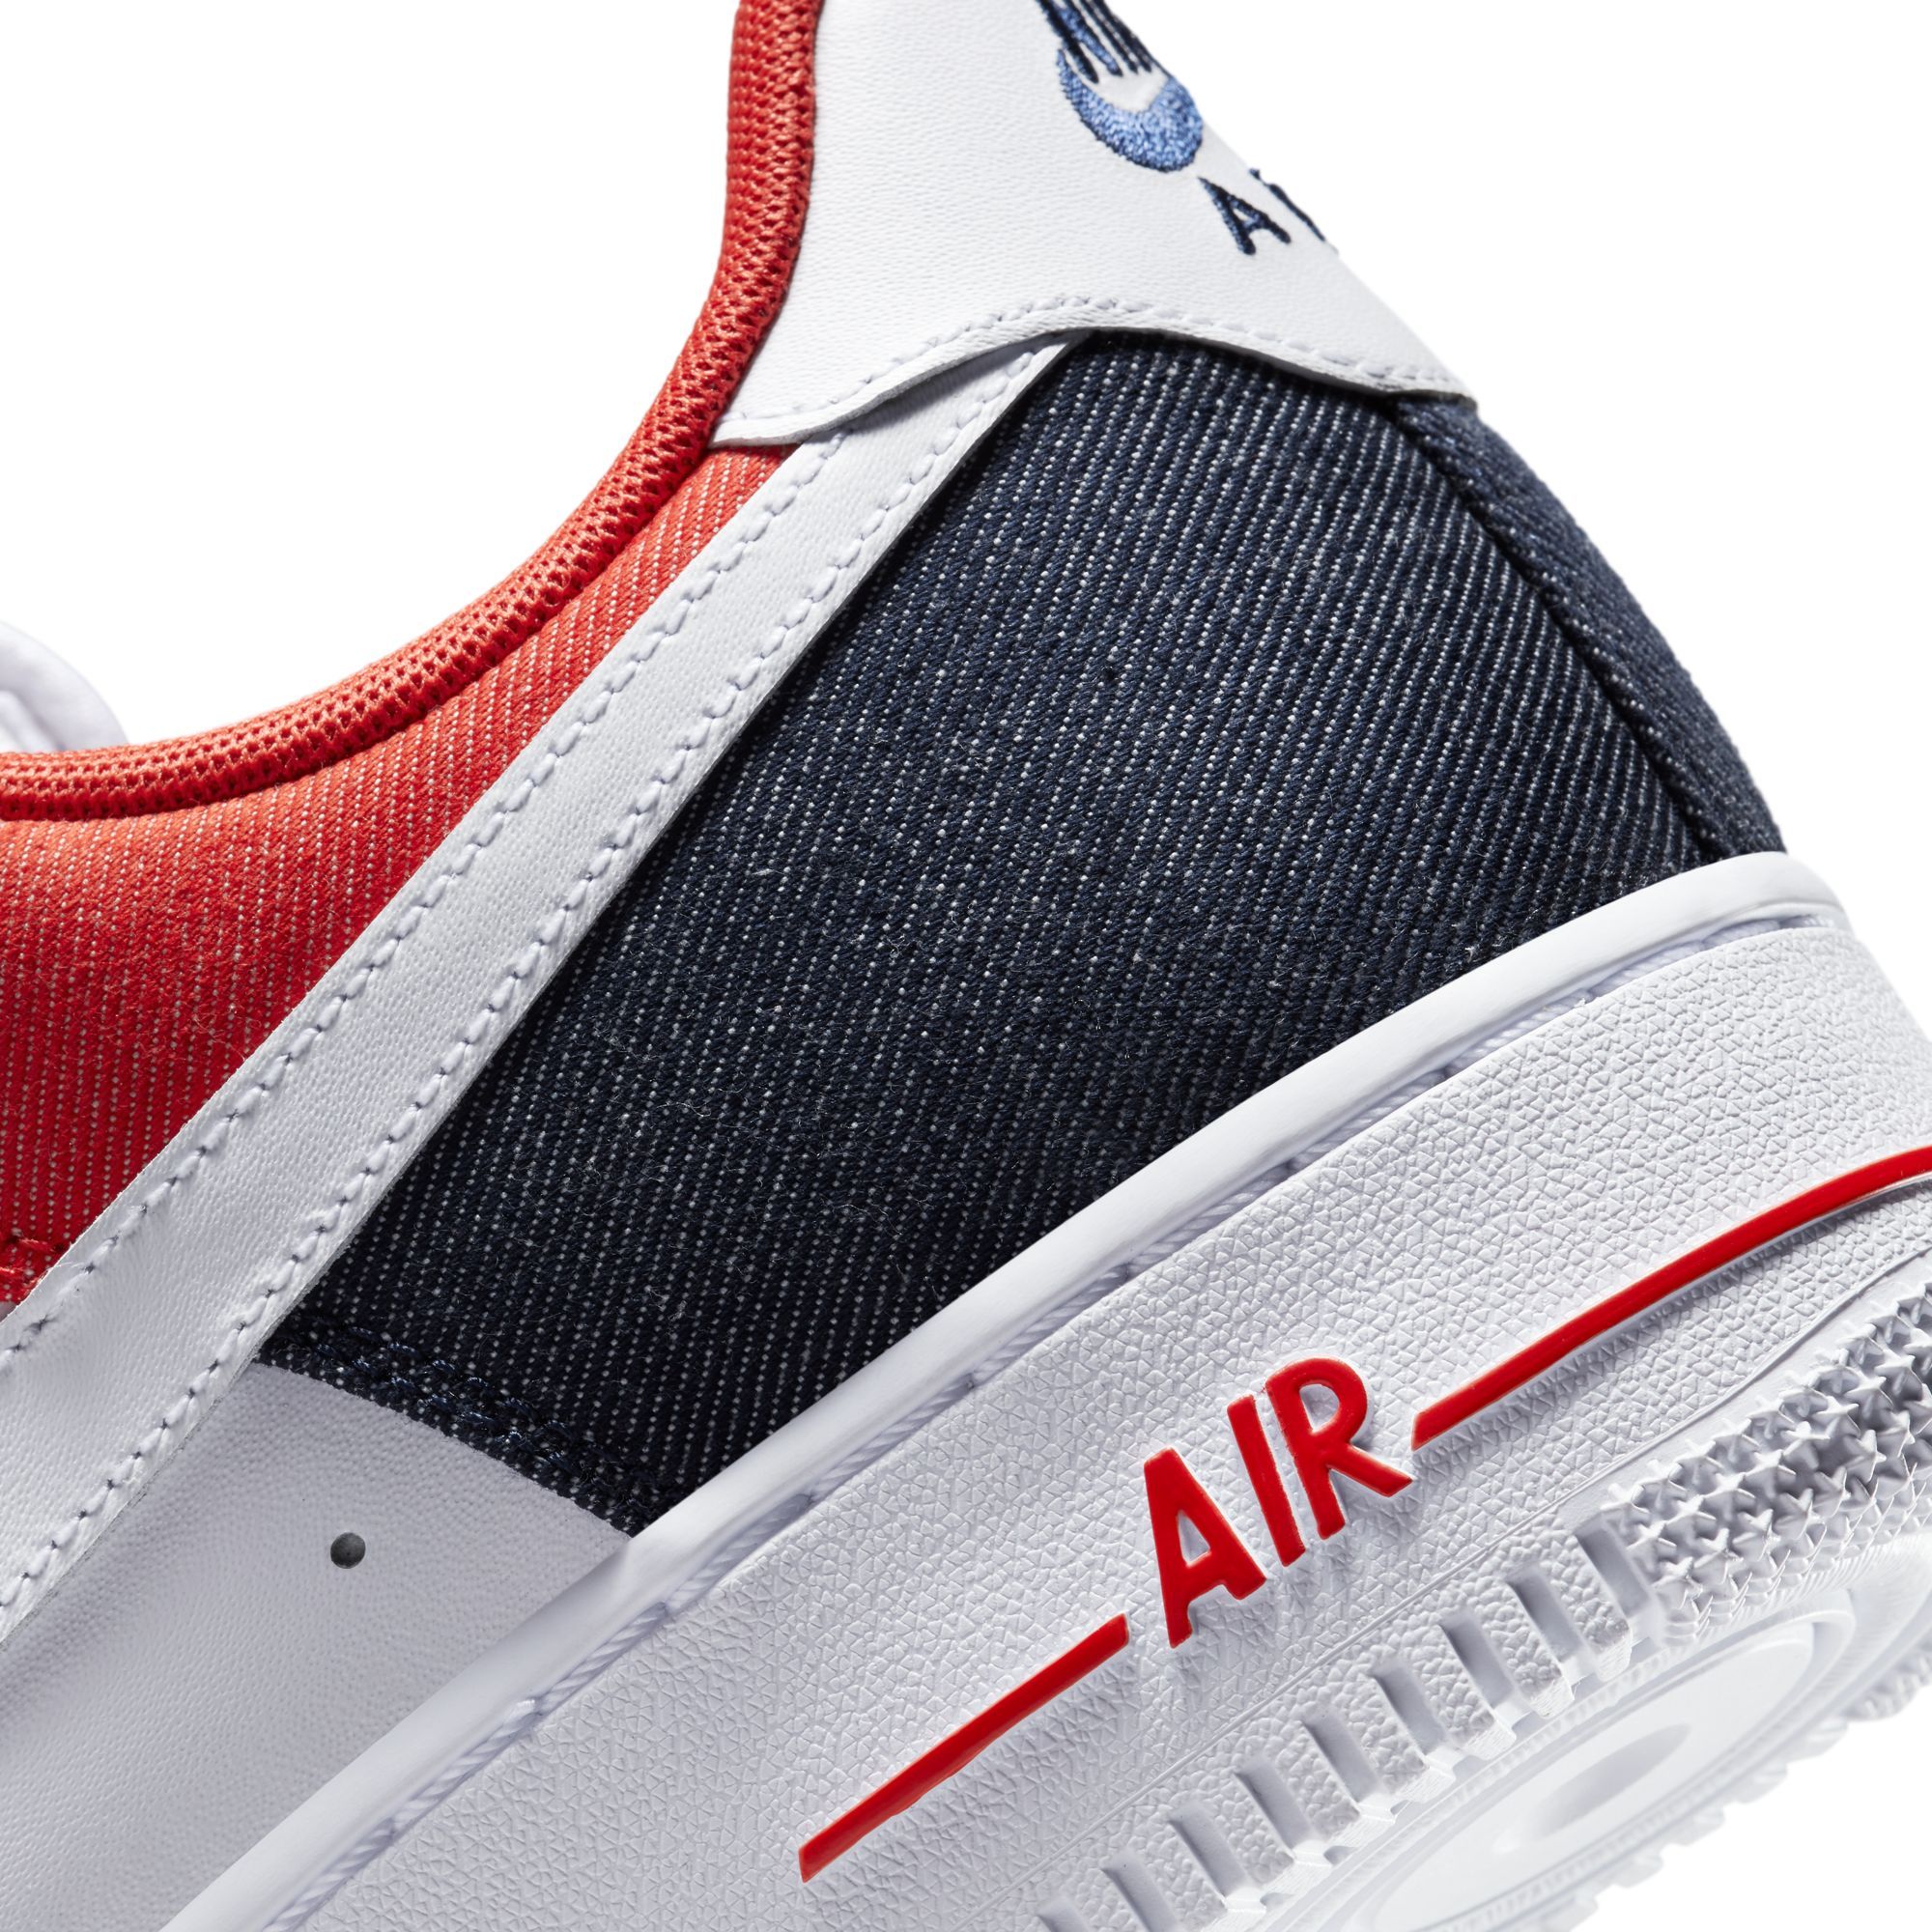 Nike Boys Air Force 1 LV8 - Shoes White/Midnight Navy/Redchile Red Size 03.5